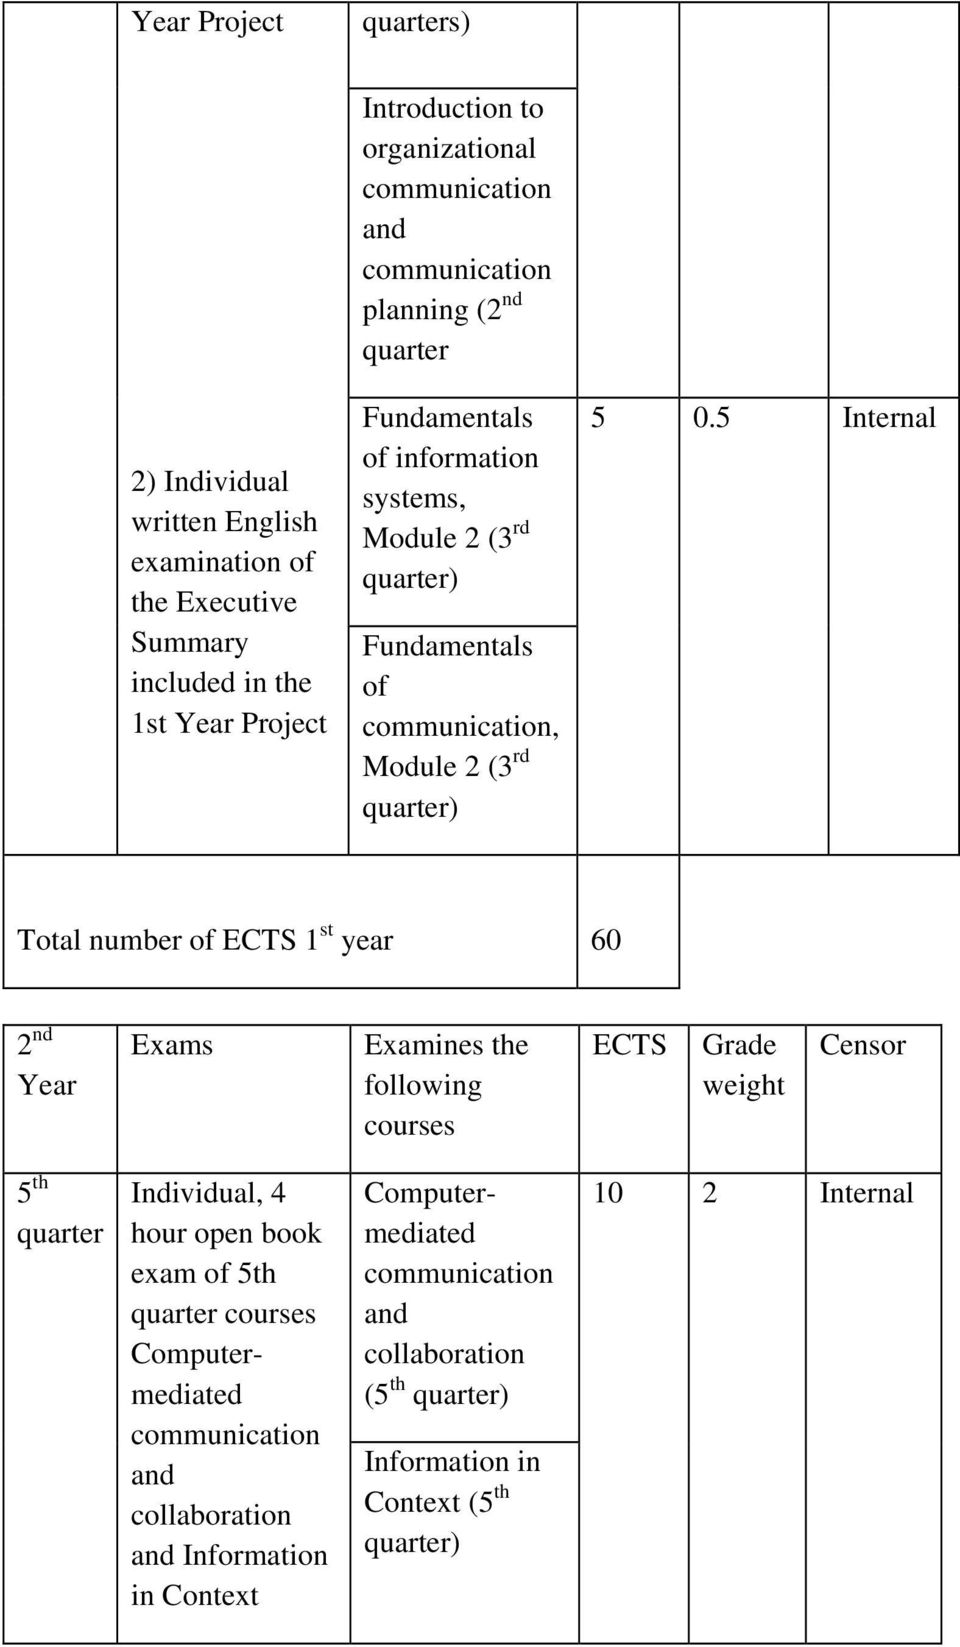 5 Internal Total number of ECTS 1 st year 60 2 nd Year Exams Examines the following courses ECTS Grade weight Censor 5 th Individual, 4 hour open book